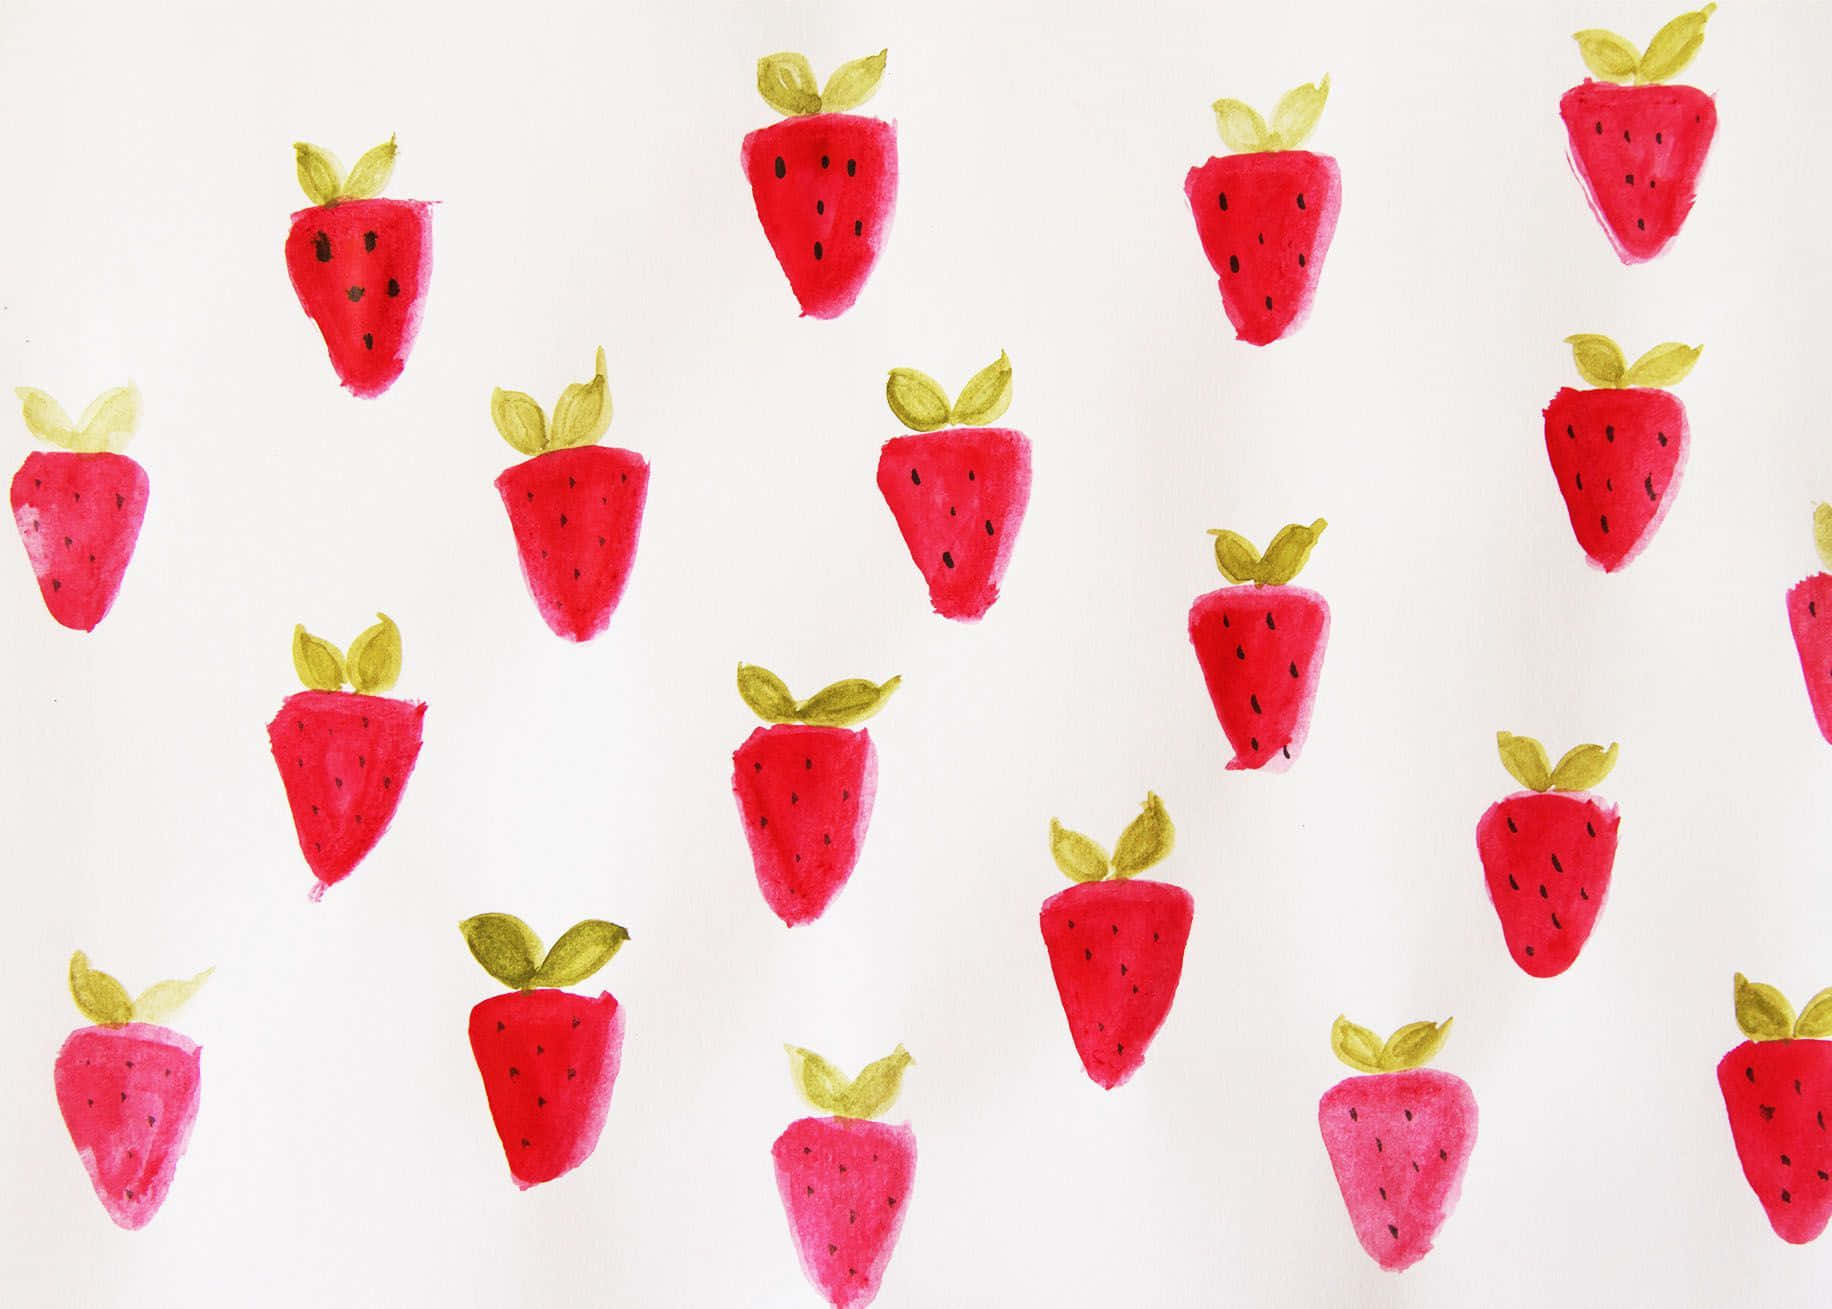 Cute Strawberry Background - Fresh strawberries illustration on a colorful pastel backdrop